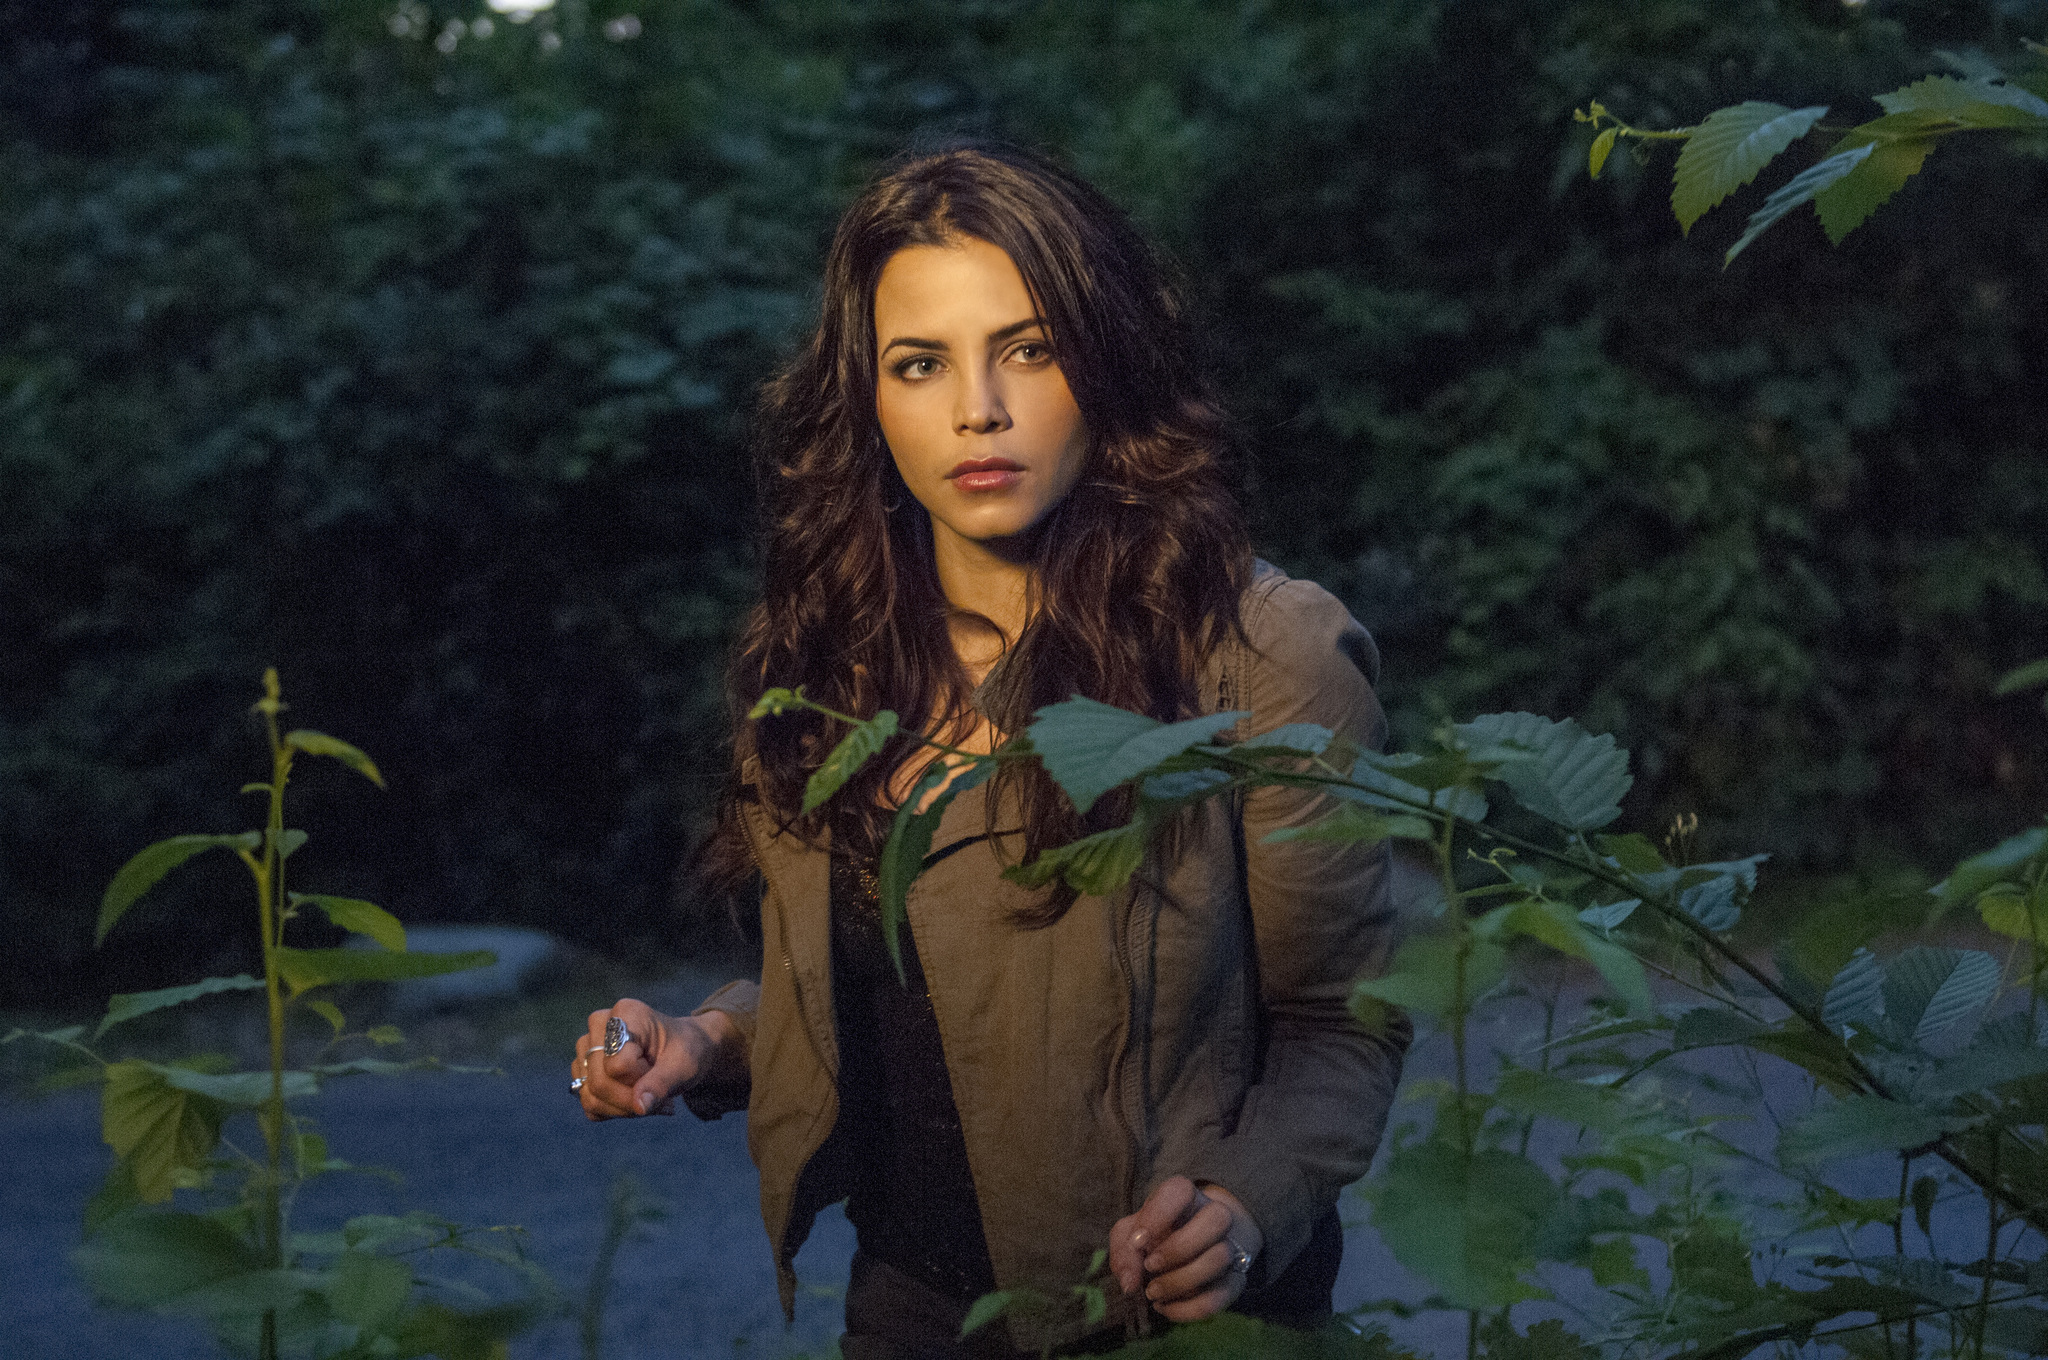 Still of Jenna Dewan Tatum in Witches of East End (2013)